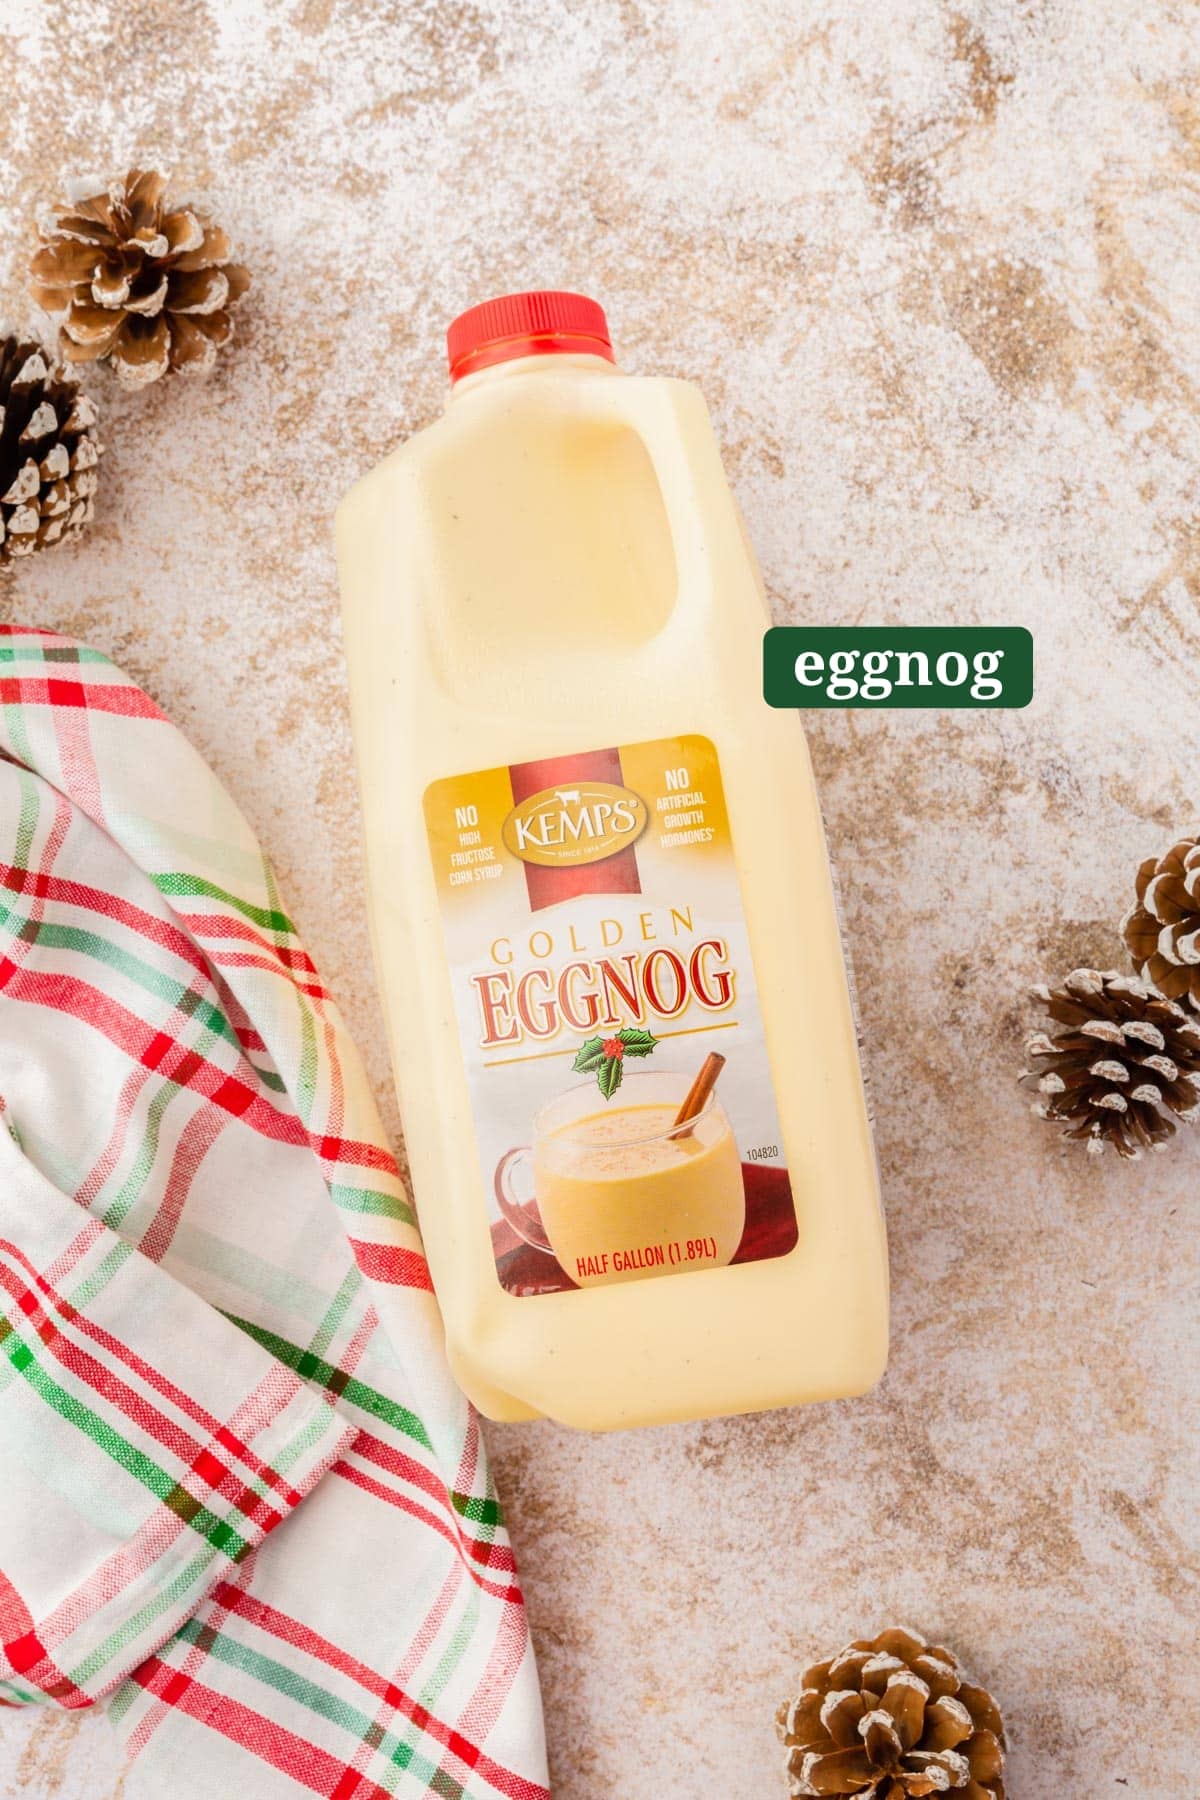 A half gallon jug of eggnog on a table with a text overlay over it.